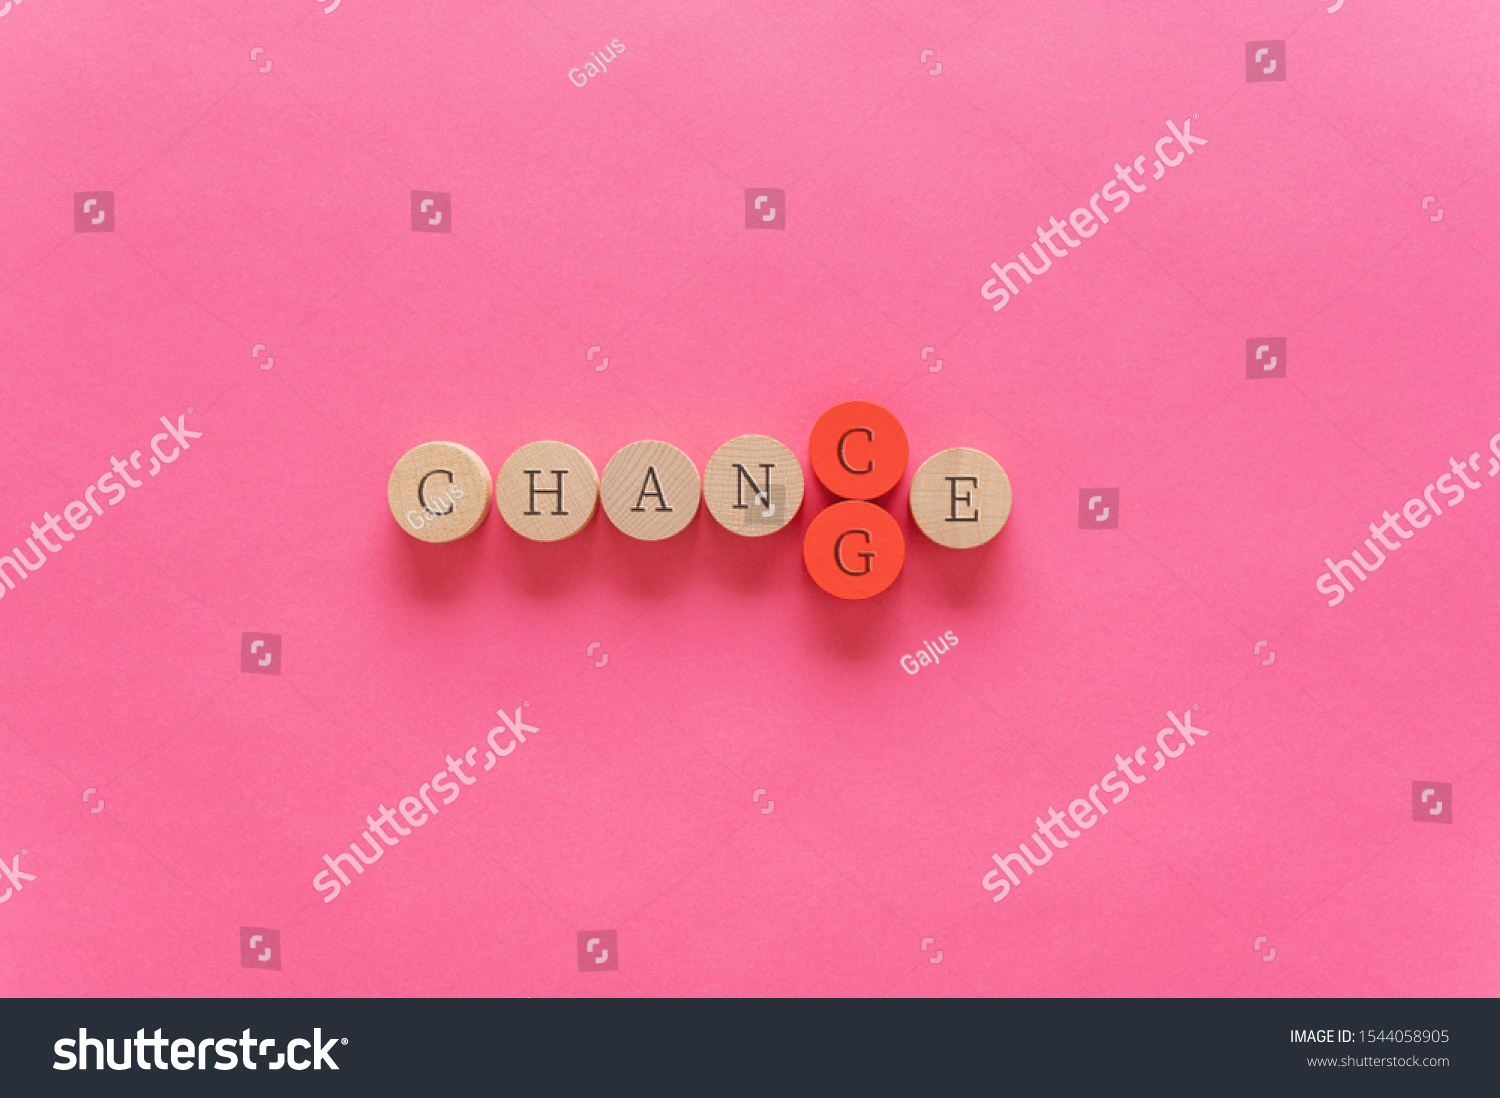 Word Change spelled on wooden cut circles with the word G on red being pushed out with letter C to change the word in Chance. Over pink background with copy space. #1544058905